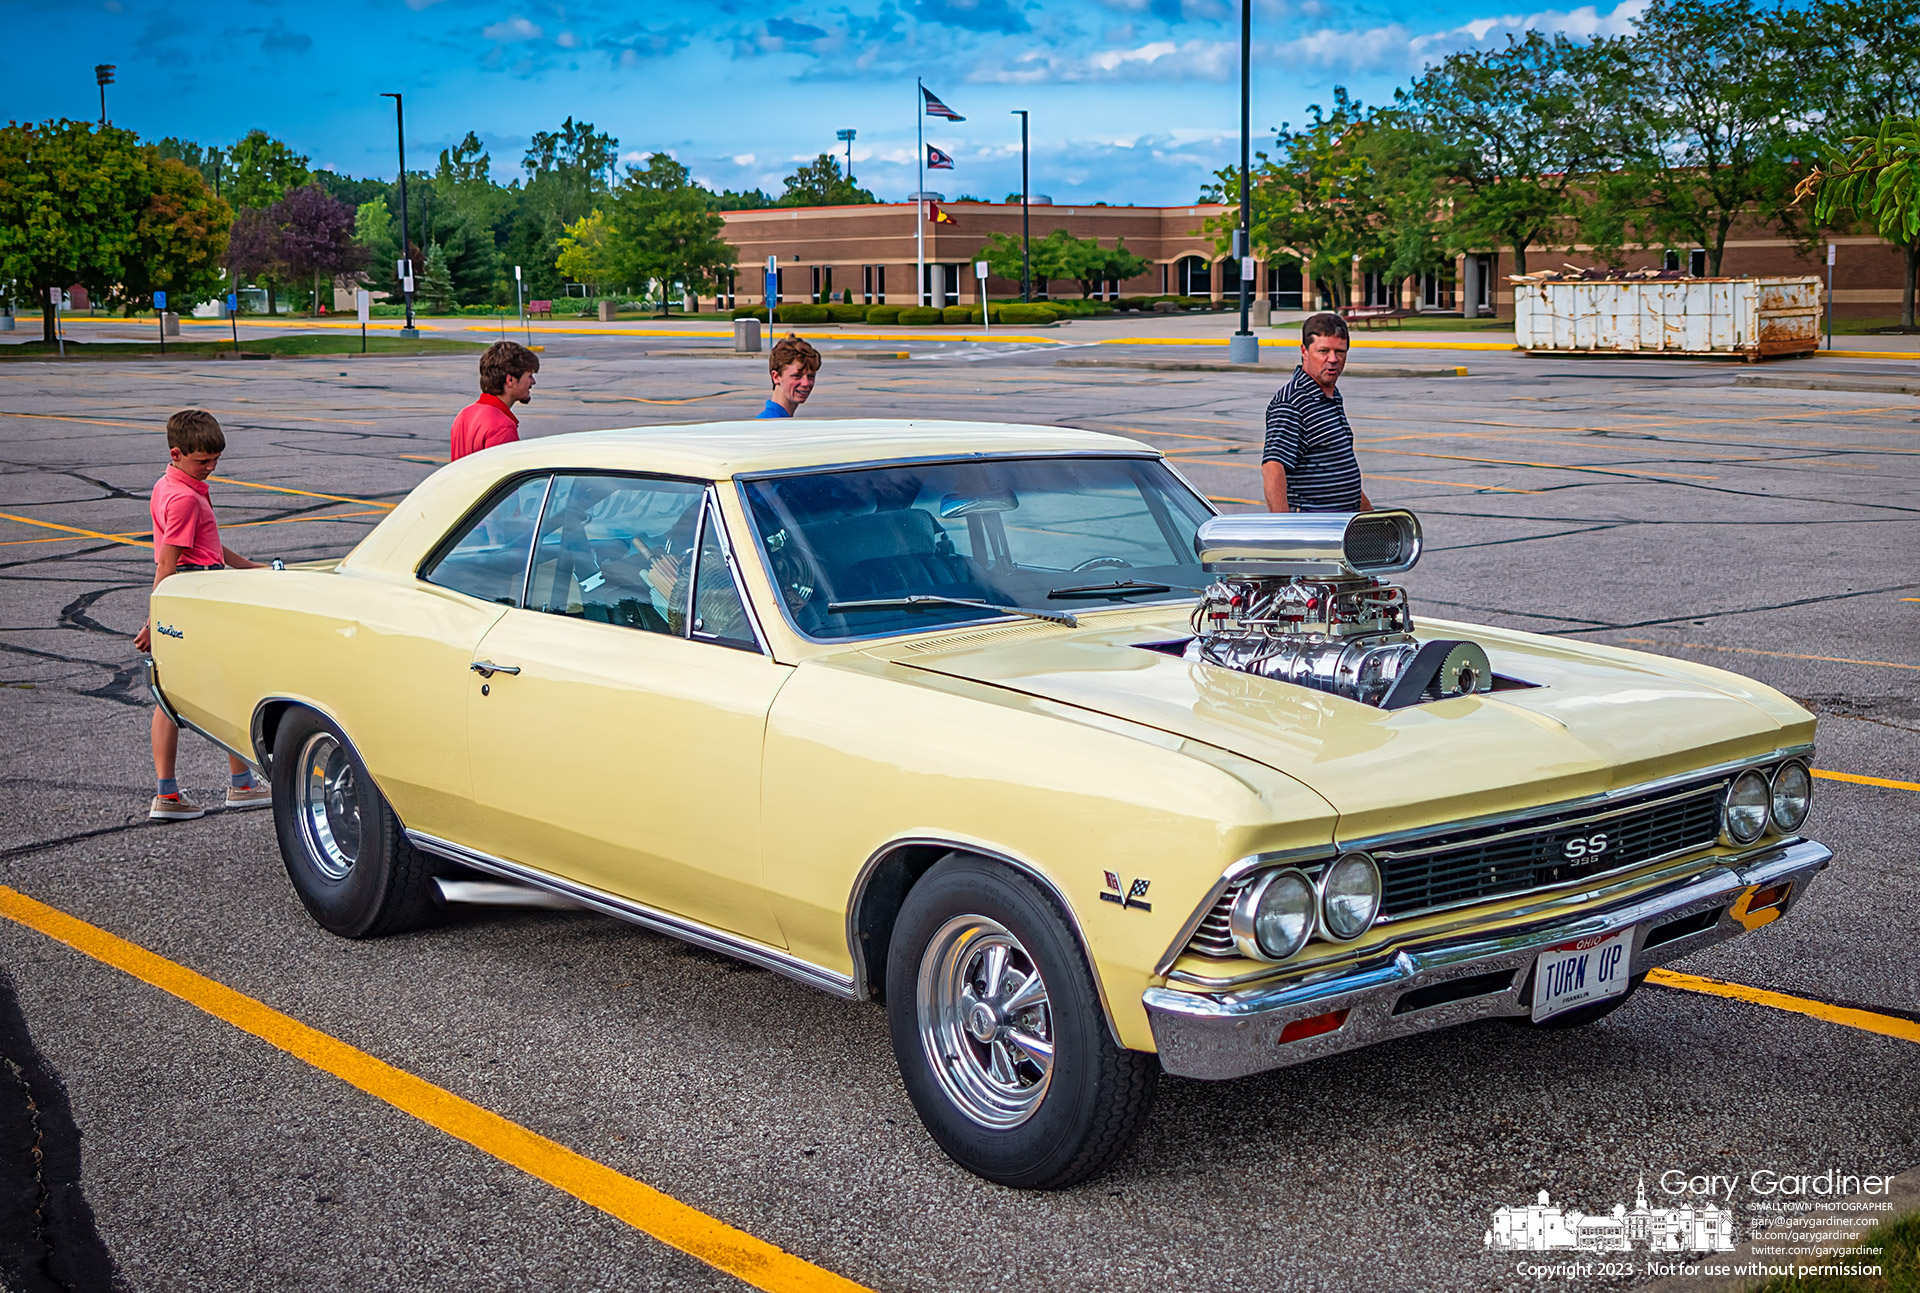 A male gathering admires a hotrod Chevy Chevelle sitting in the parking lot of Westerville North as an unofficial used car lot for passers-by to notice. My Final Photo for August 6, 2023.